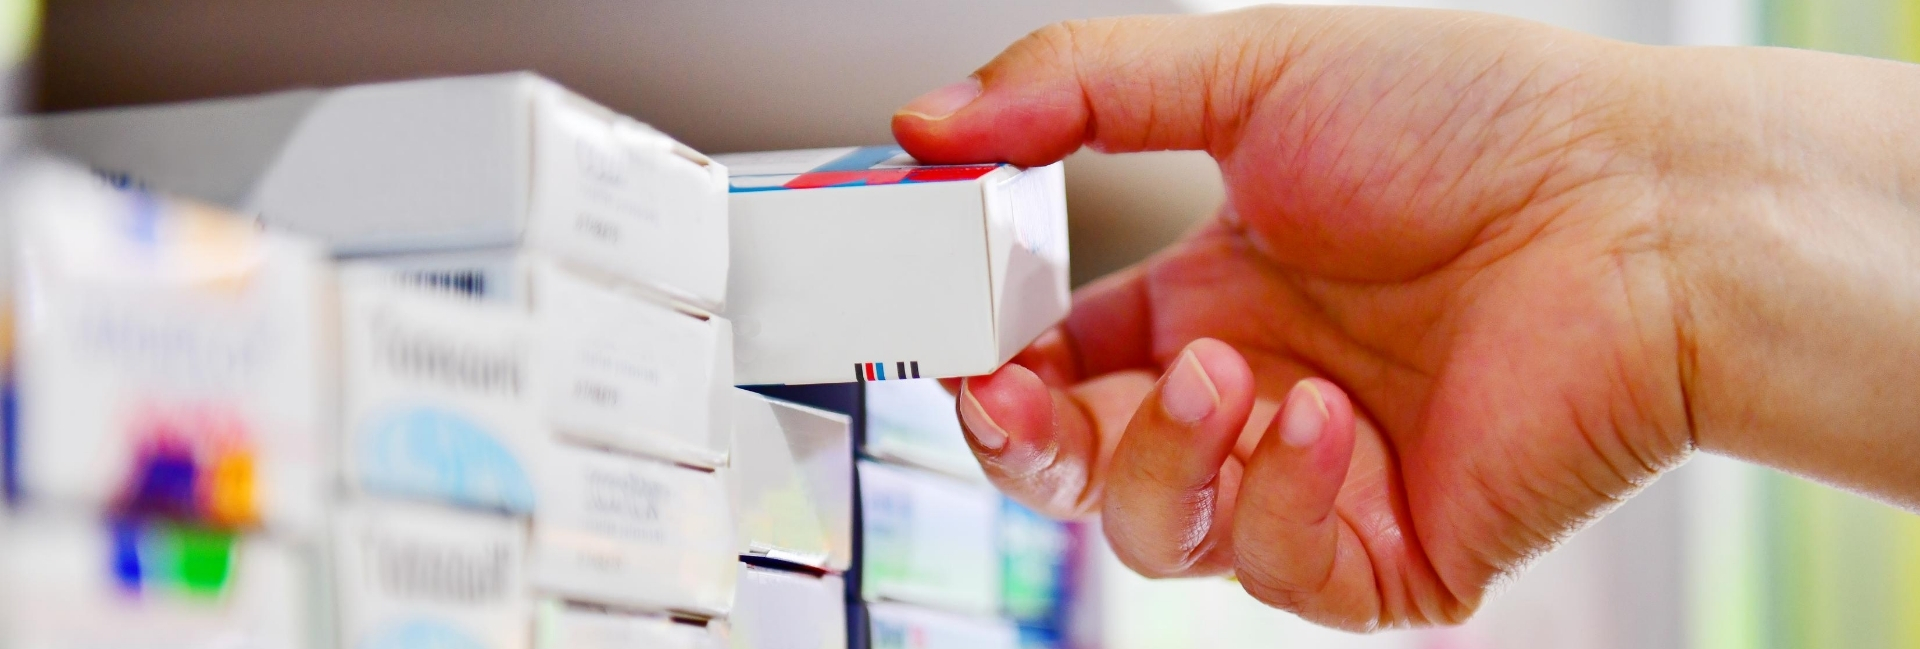 Picture of a hand taking medication from a shelf